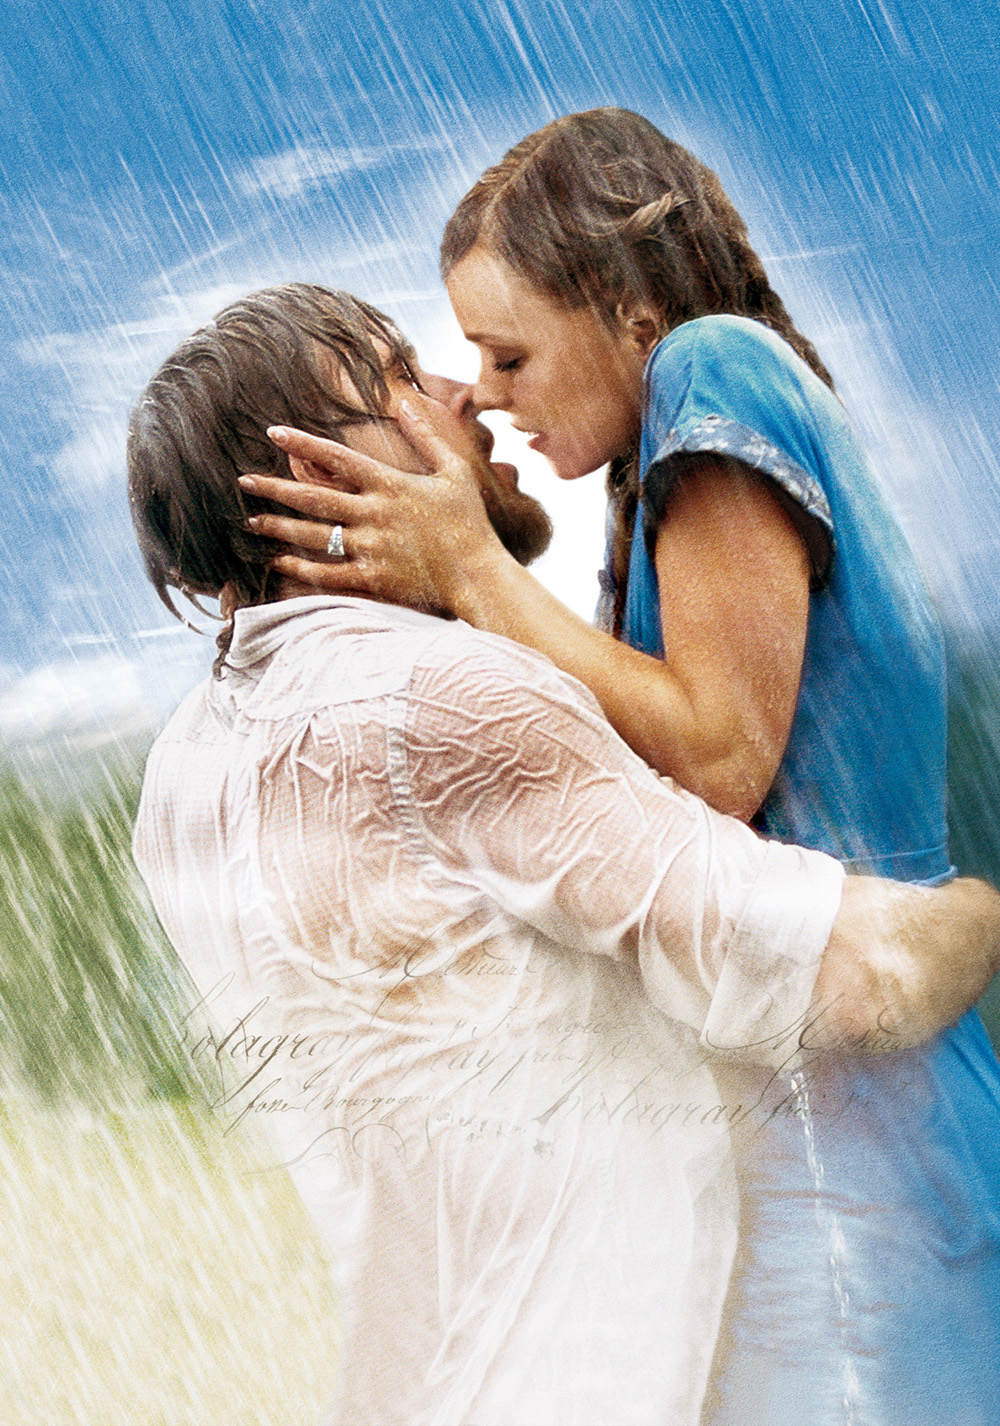 The Notebook Picture